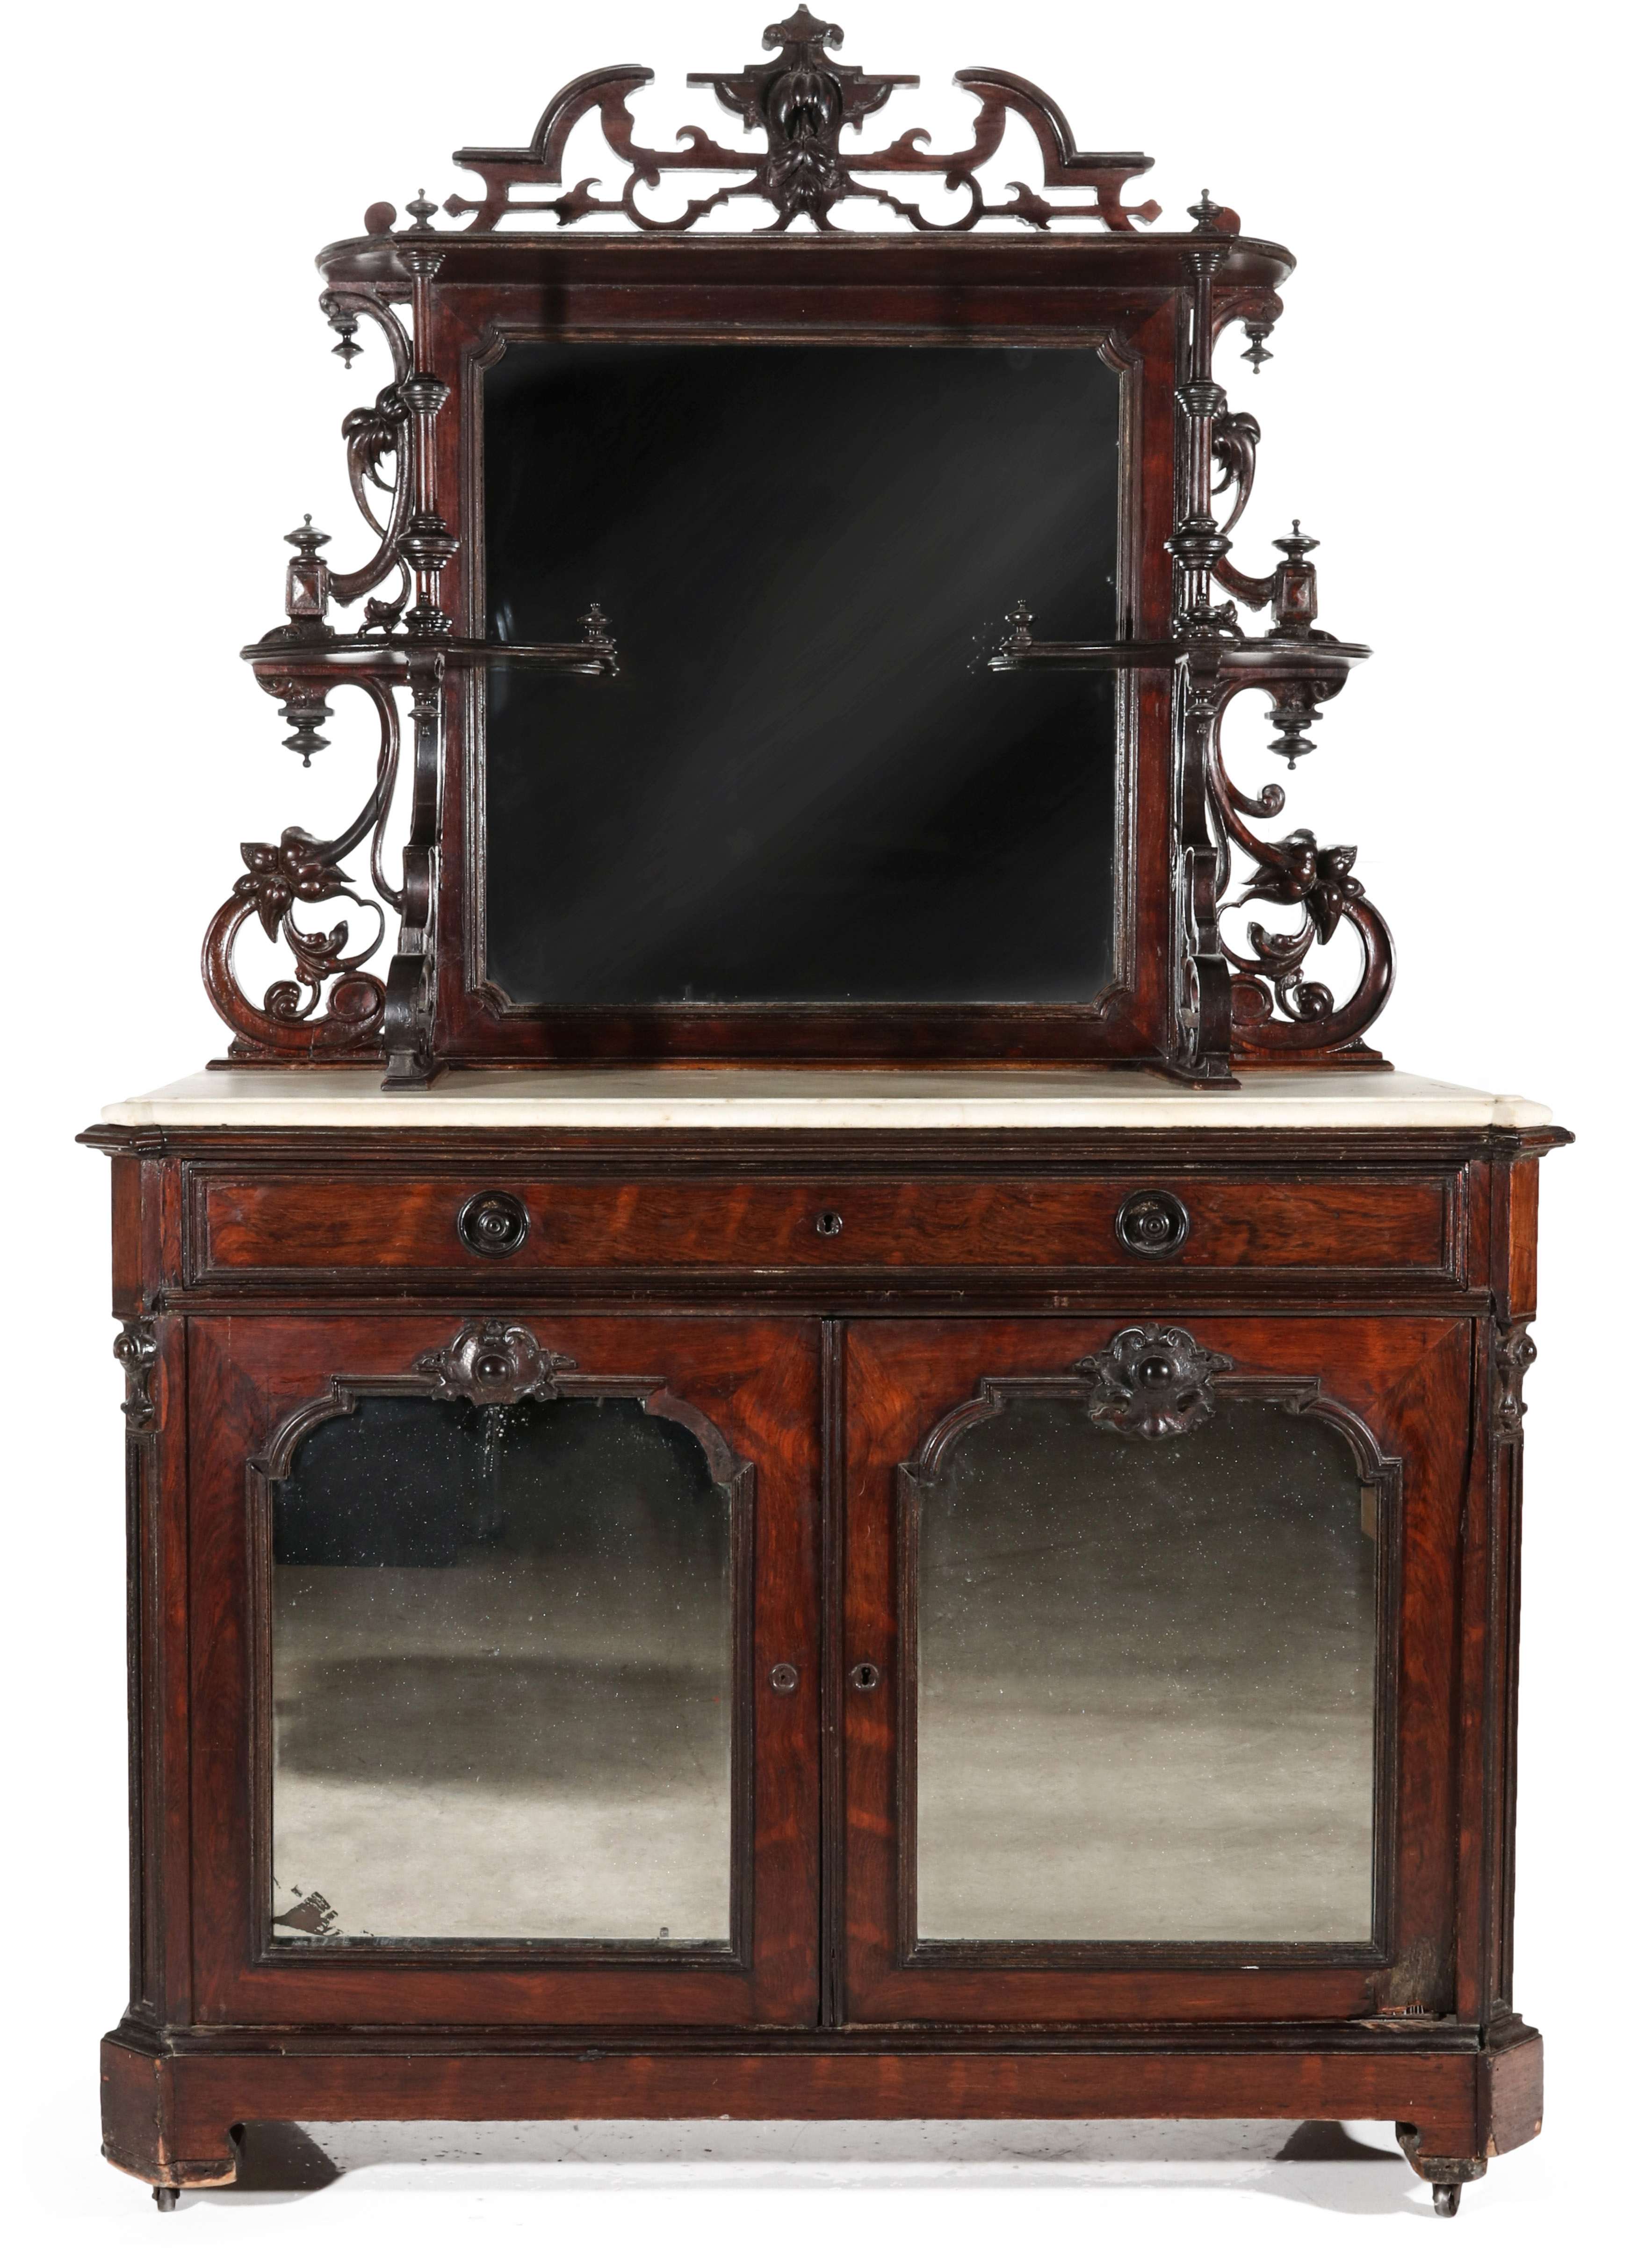 AN ELABORATE 19TH C. CARVED ROSEWOOD SIDEBOARD